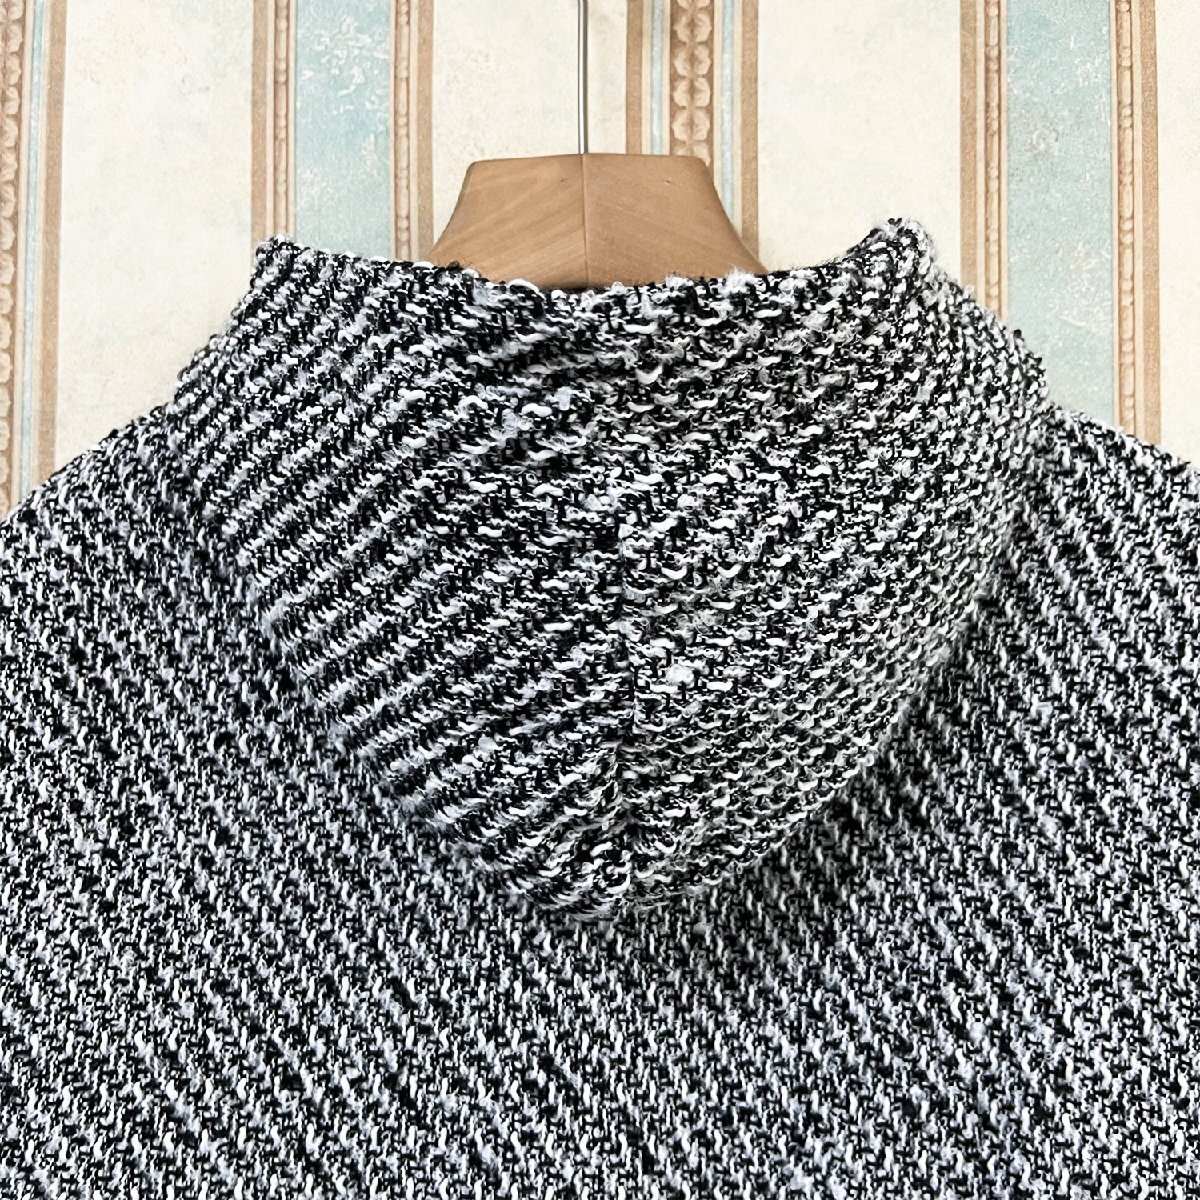  high class regular price 4 ten thousand FRANKLIN MUSK* America * New York departure Parker fine quality wool soft robust braided piece . tops pull over spring size 3